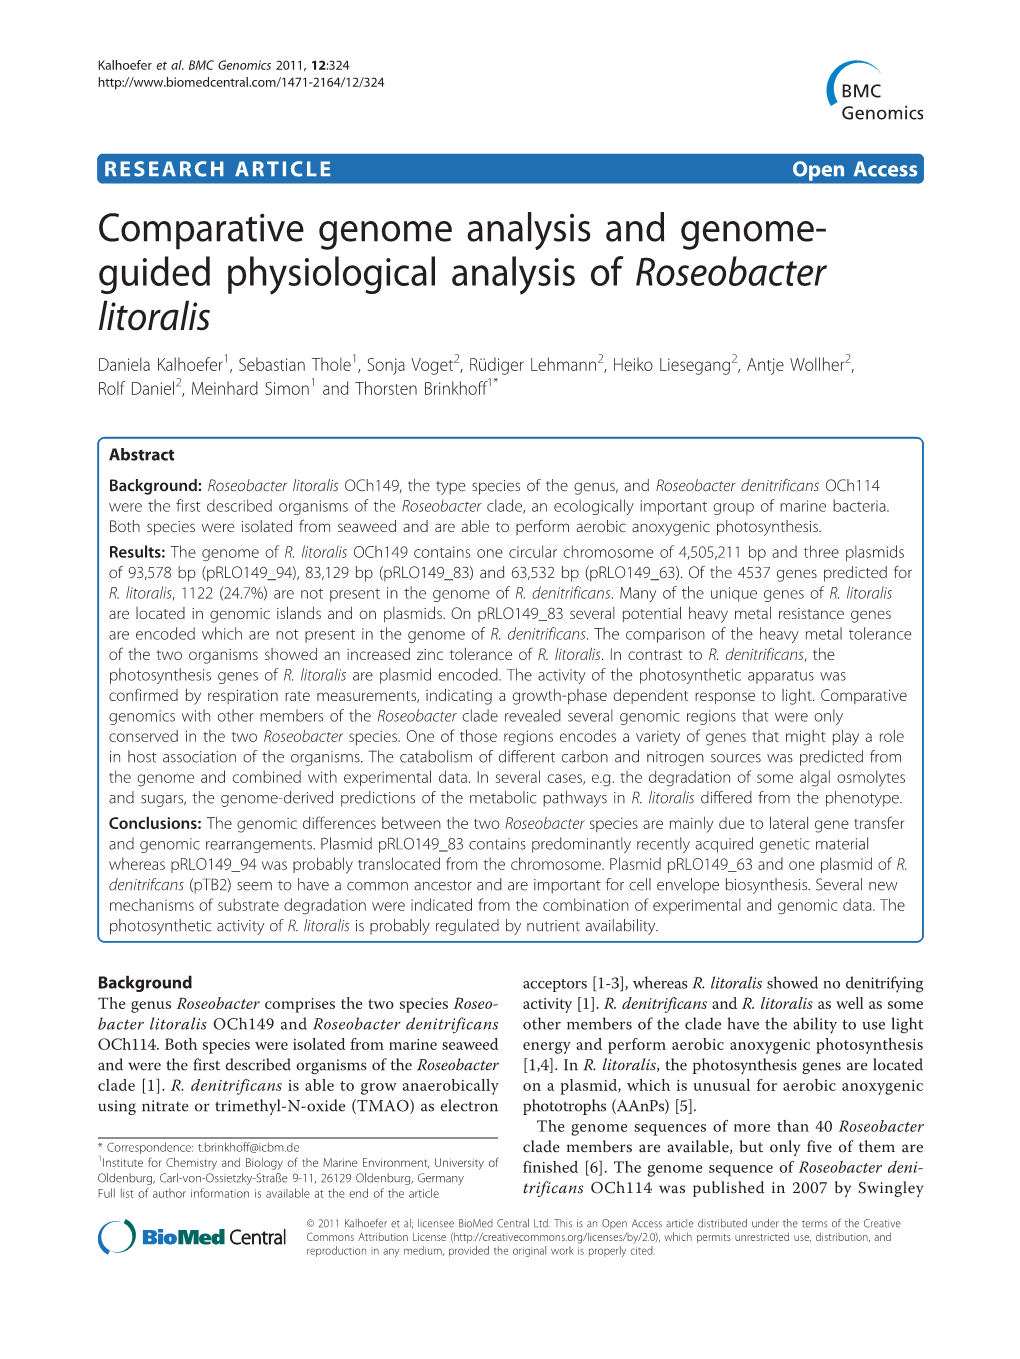 Comparative Genome Analysis and Genome-Guided Physiological